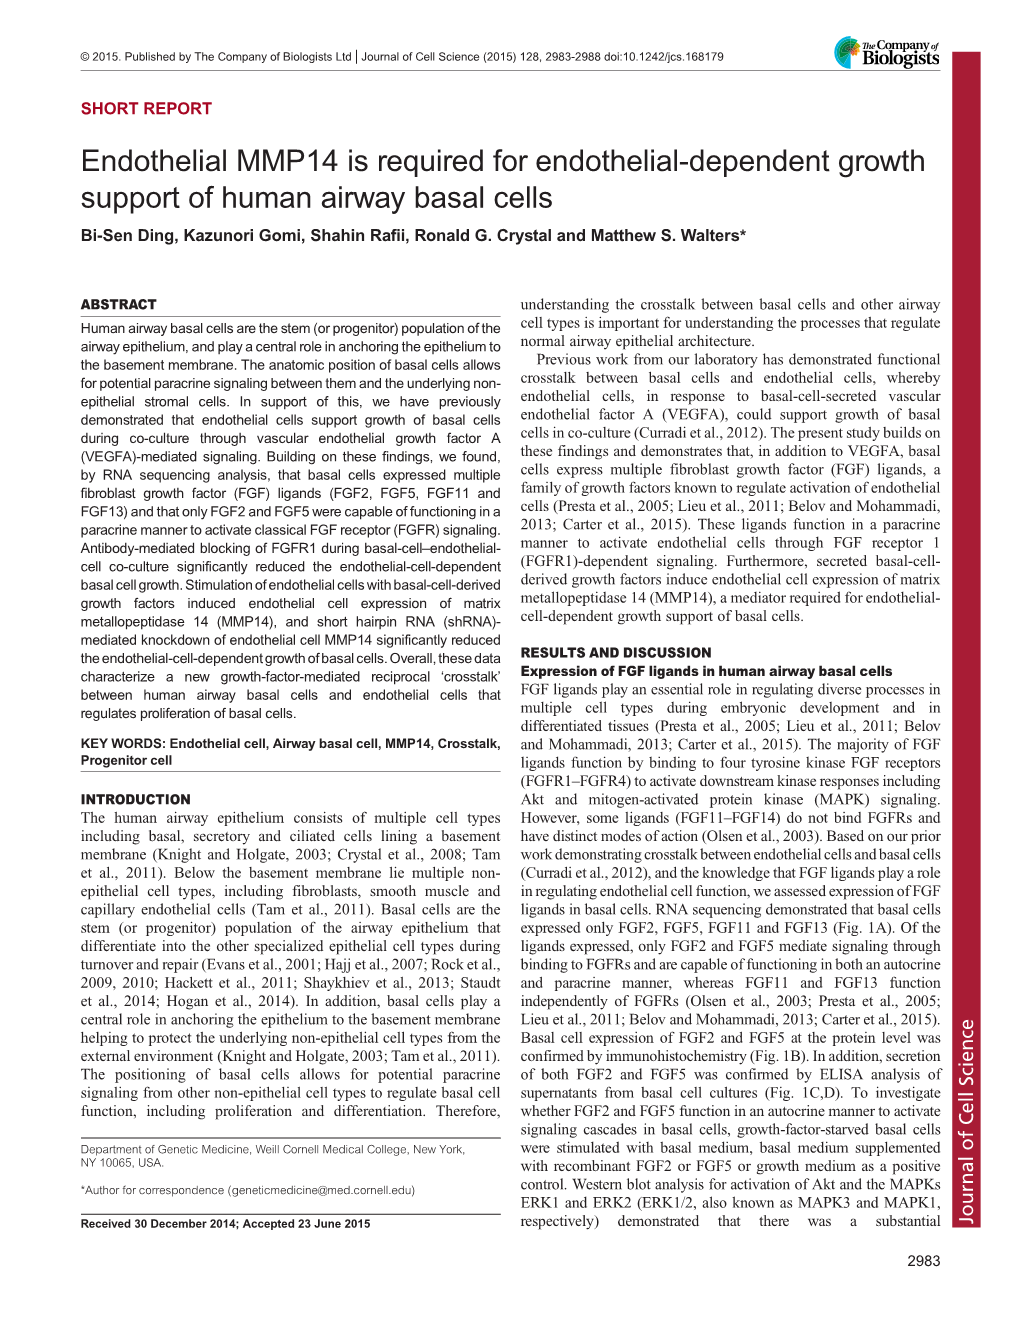 Endothelial MMP14 Is Required for Endothelial-Dependent Growth Support of Human Airway Basal Cells Bi-Sen Ding, Kazunori Gomi, Shahin Rafii, Ronald G